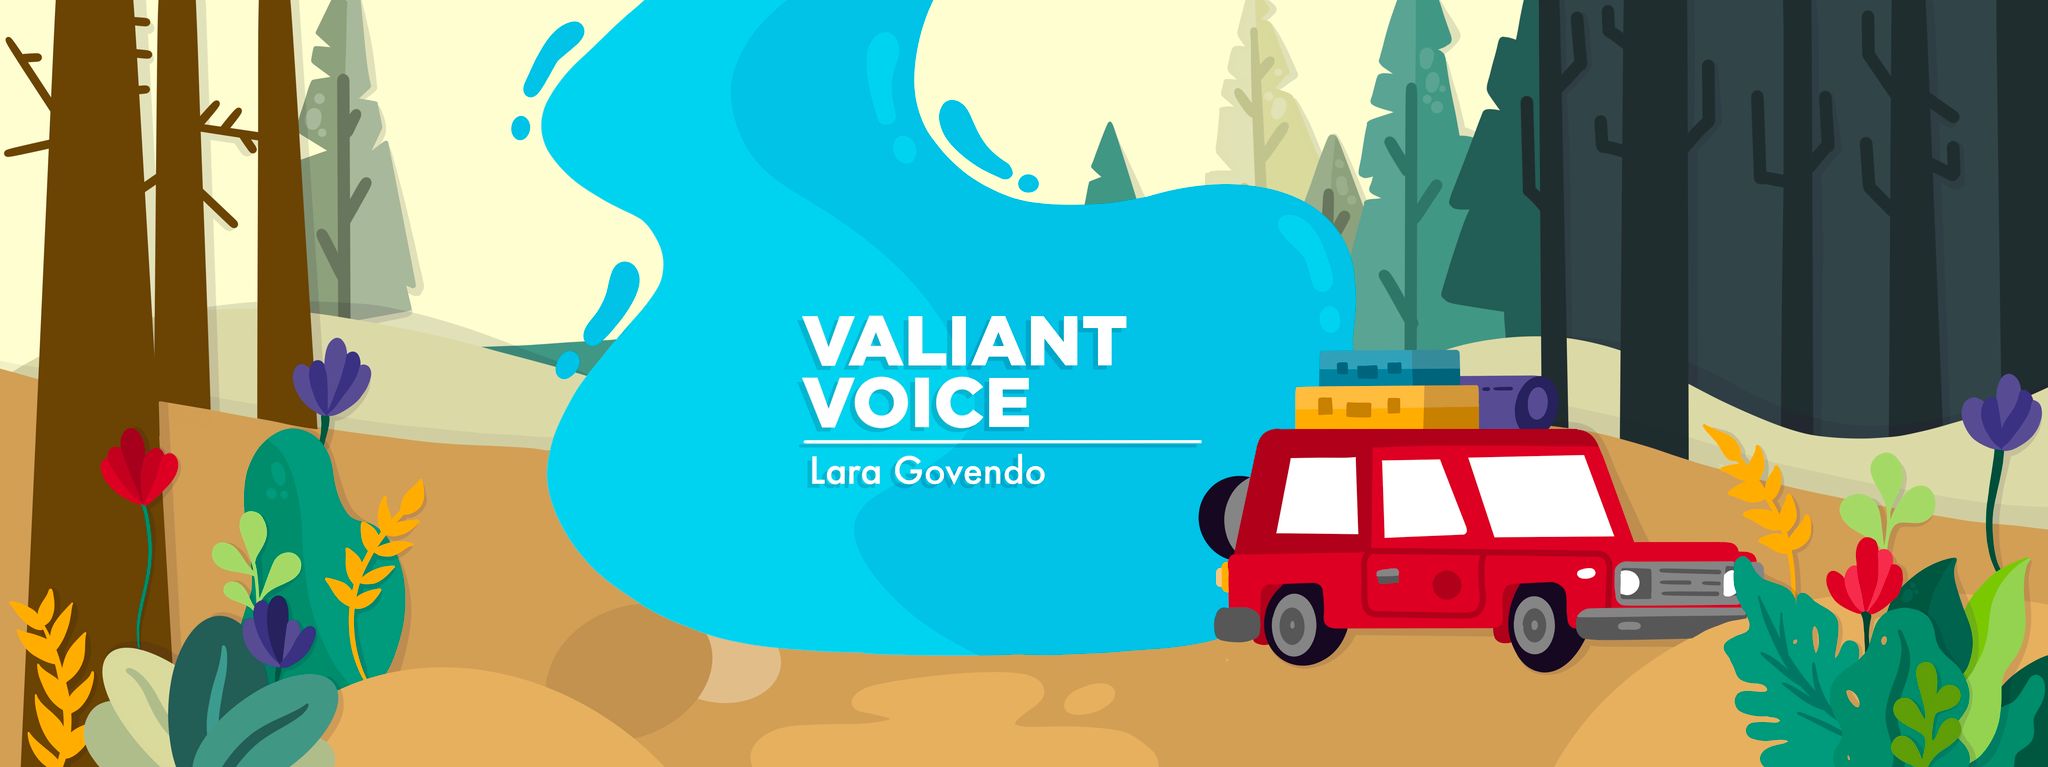 Cystic Fibrosis Awareness Month | Cystic Fibrosis News Today | A banner for Lara Govendo's column, depicting a car on a road trip winding through a forest